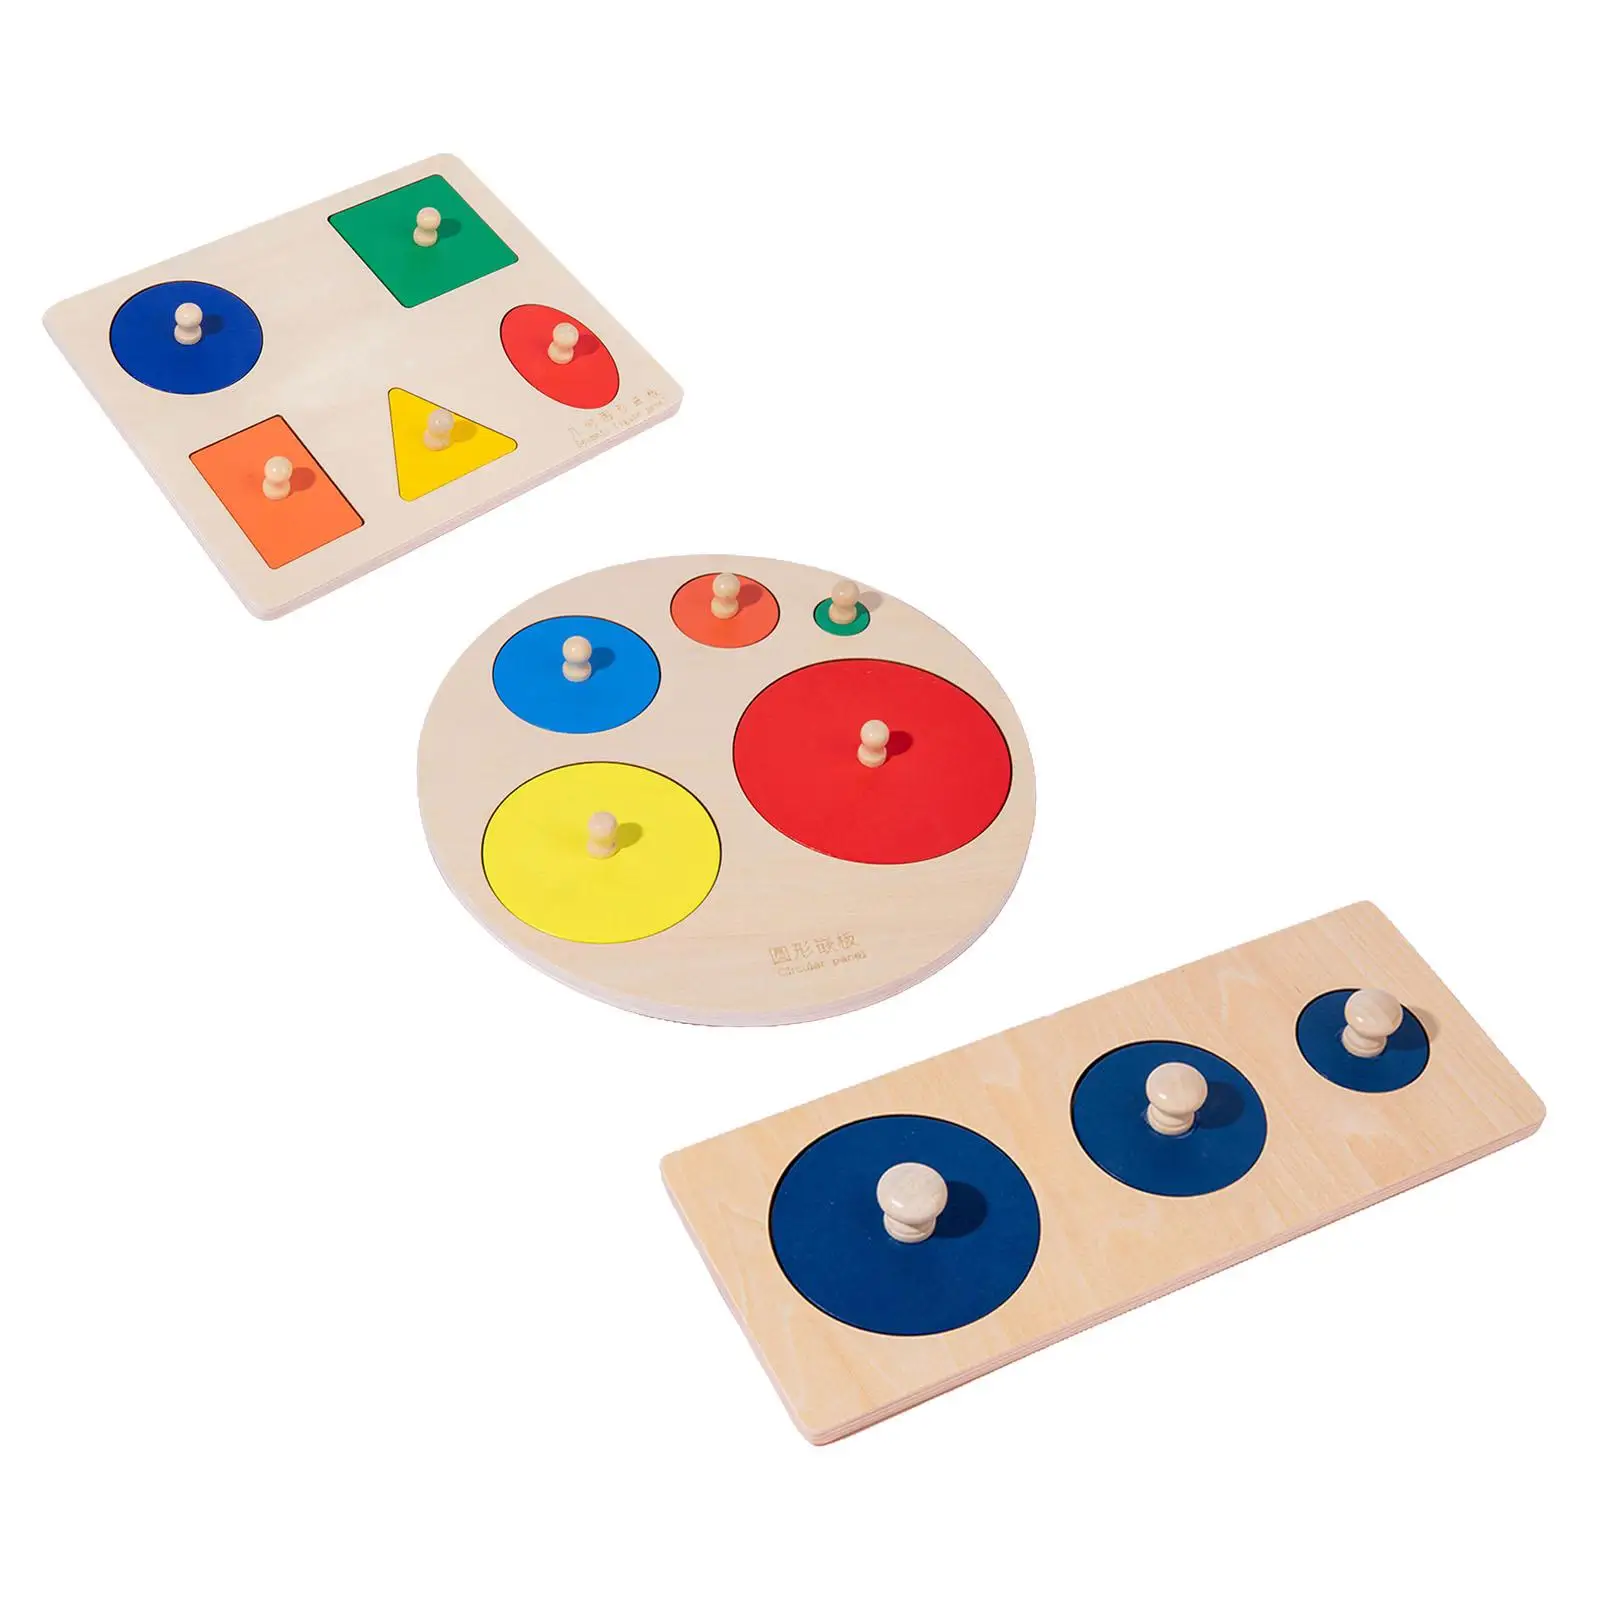 Grasp Board Preschool Learning Educational Material Sensorial Toy Early Learning Wood Knob Puzzle Peg Board for Early Education